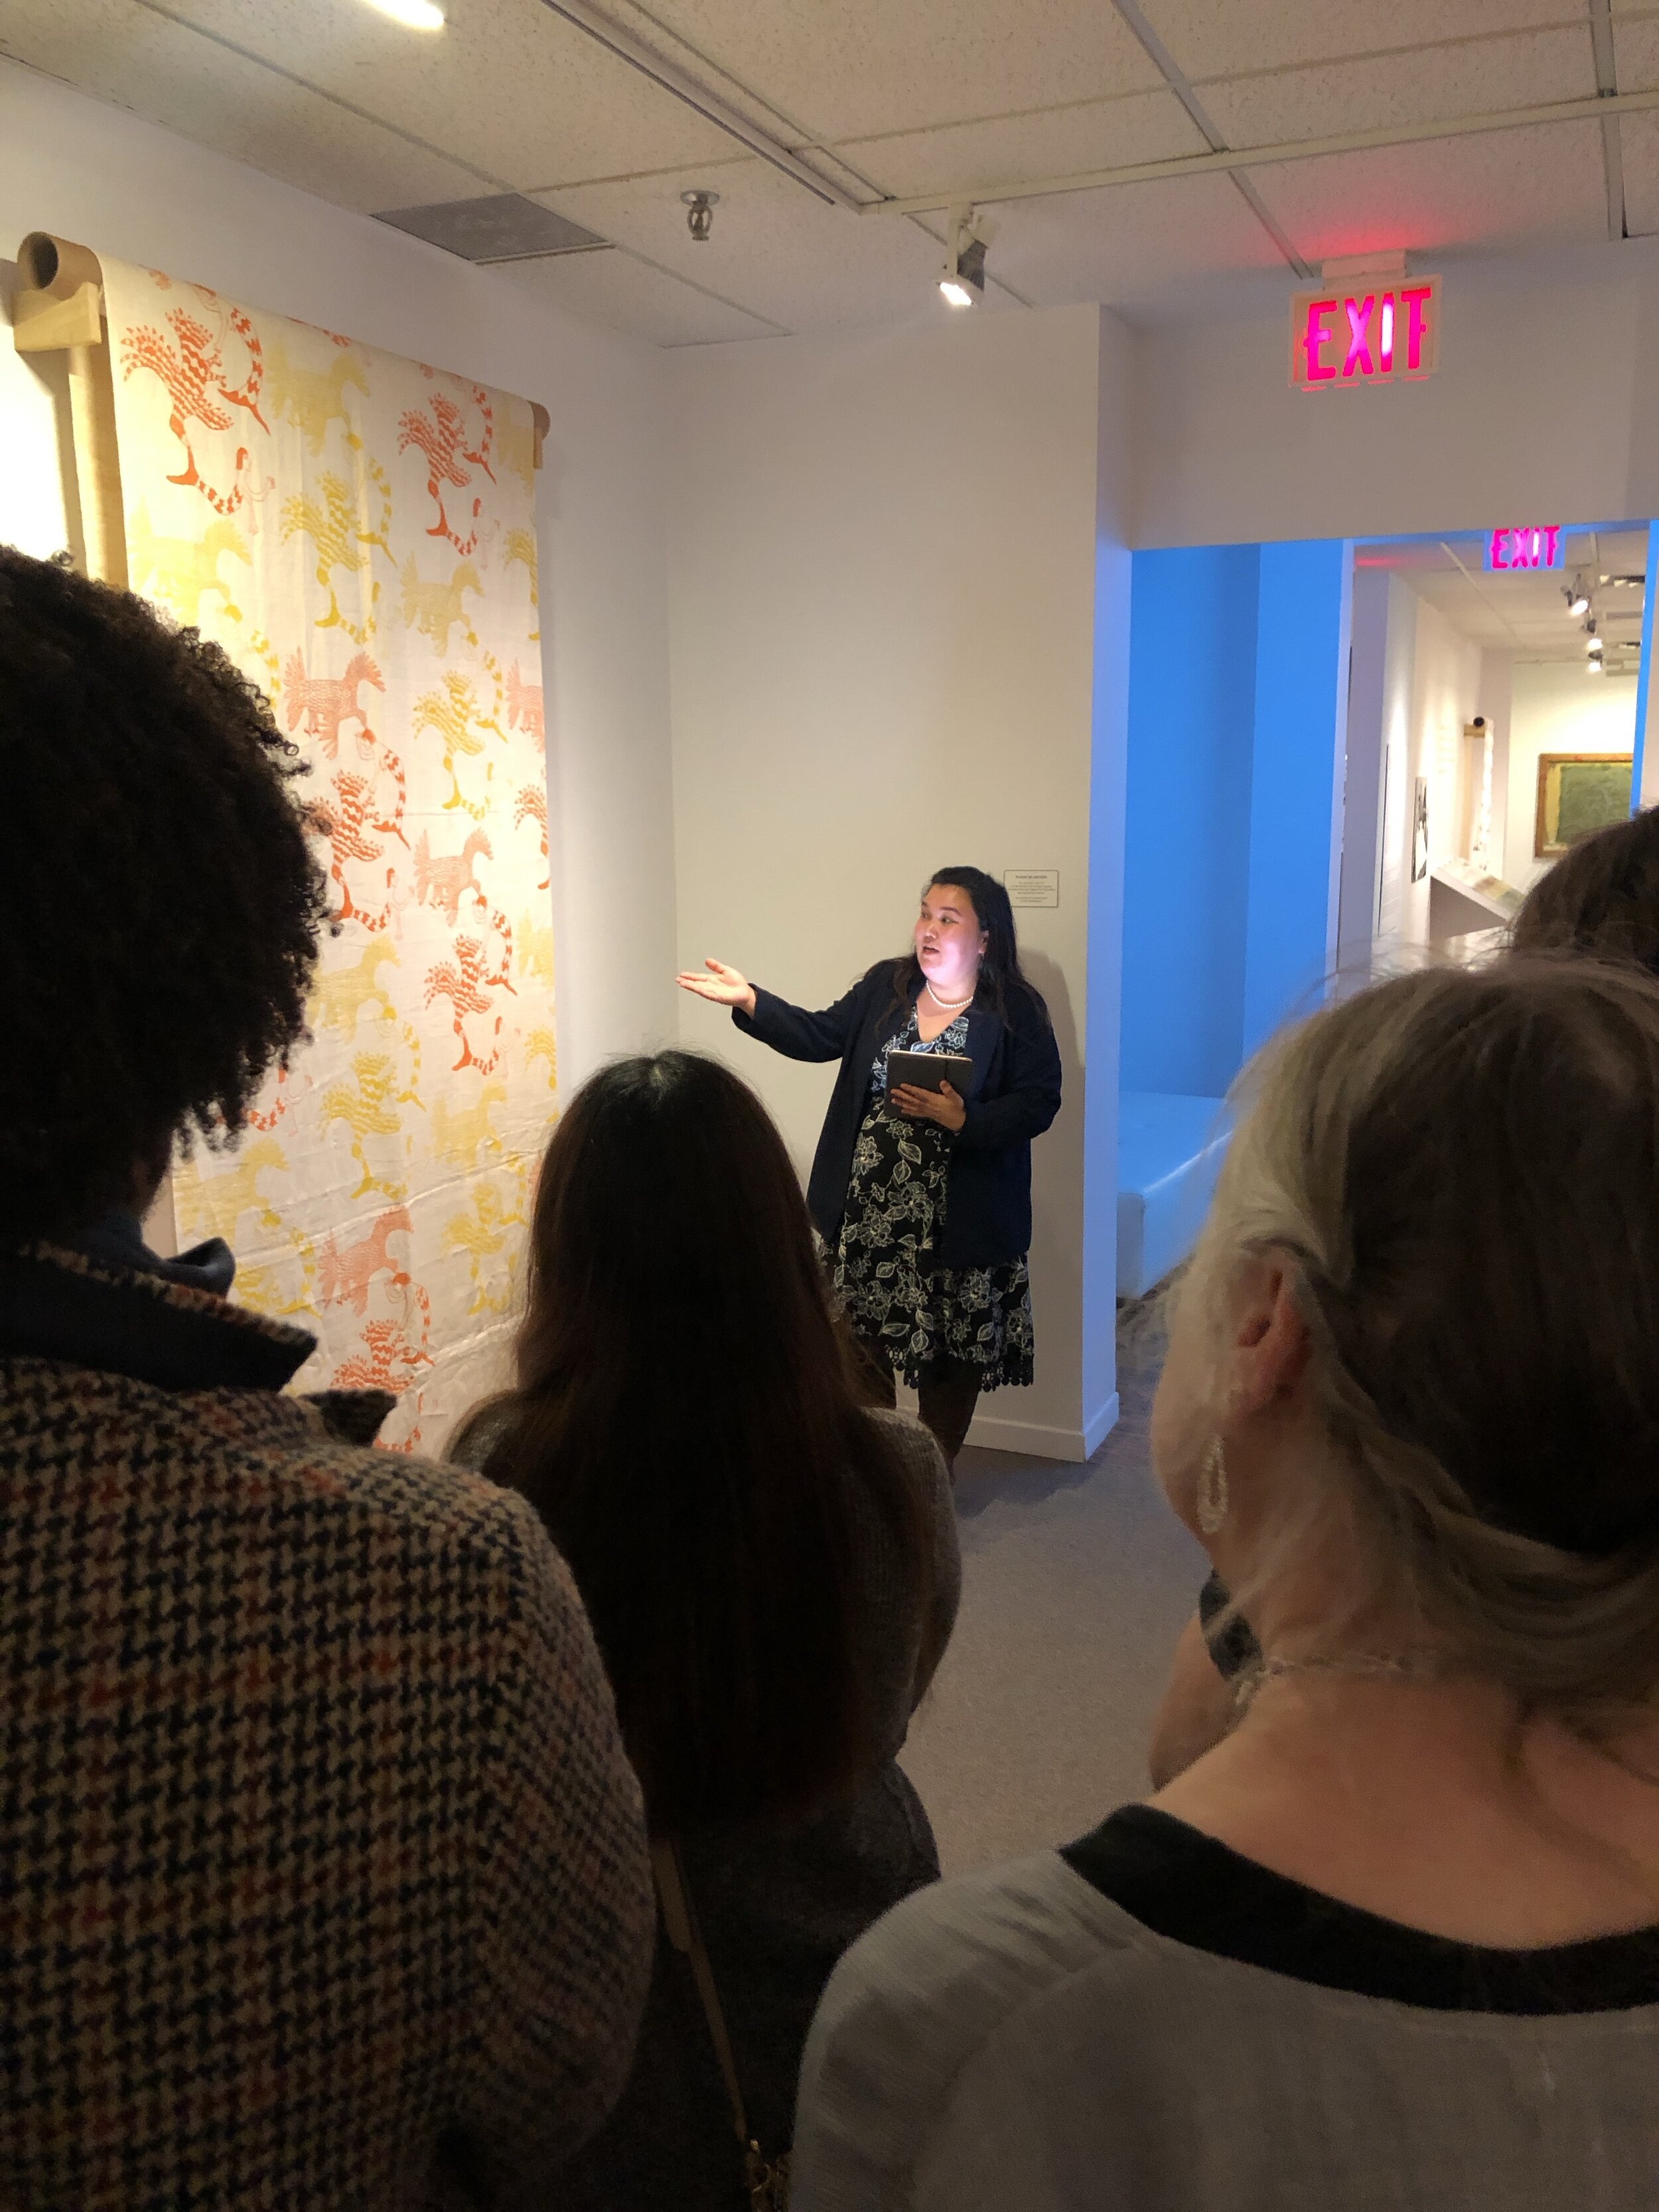  Nakasuk giving a tour of the Textile Museum of Canada, Toronto ON, focusing on artists from her community and Kinngait Studios. December 2019. Photo courtesy of Nakasuk Alariaq. 